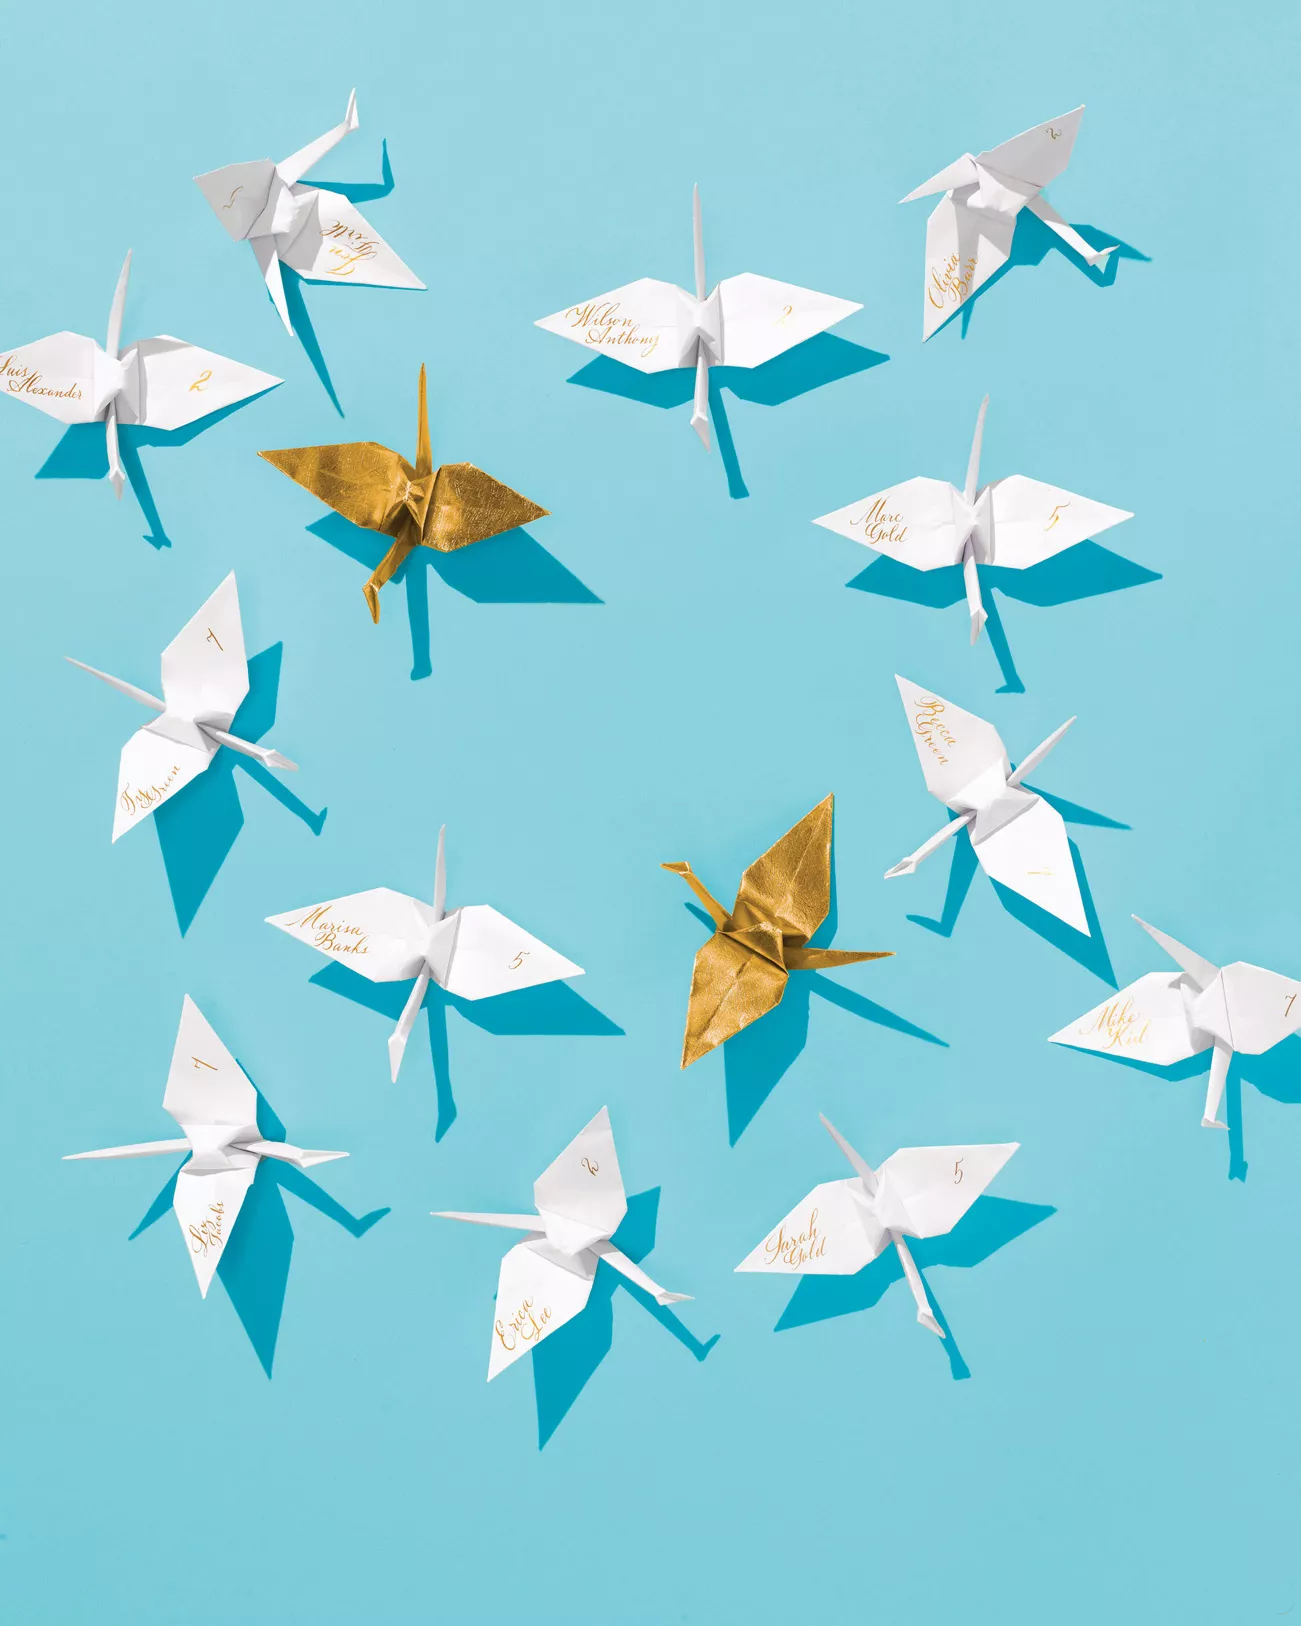 How to Make An Origami Crane for Your Wedding